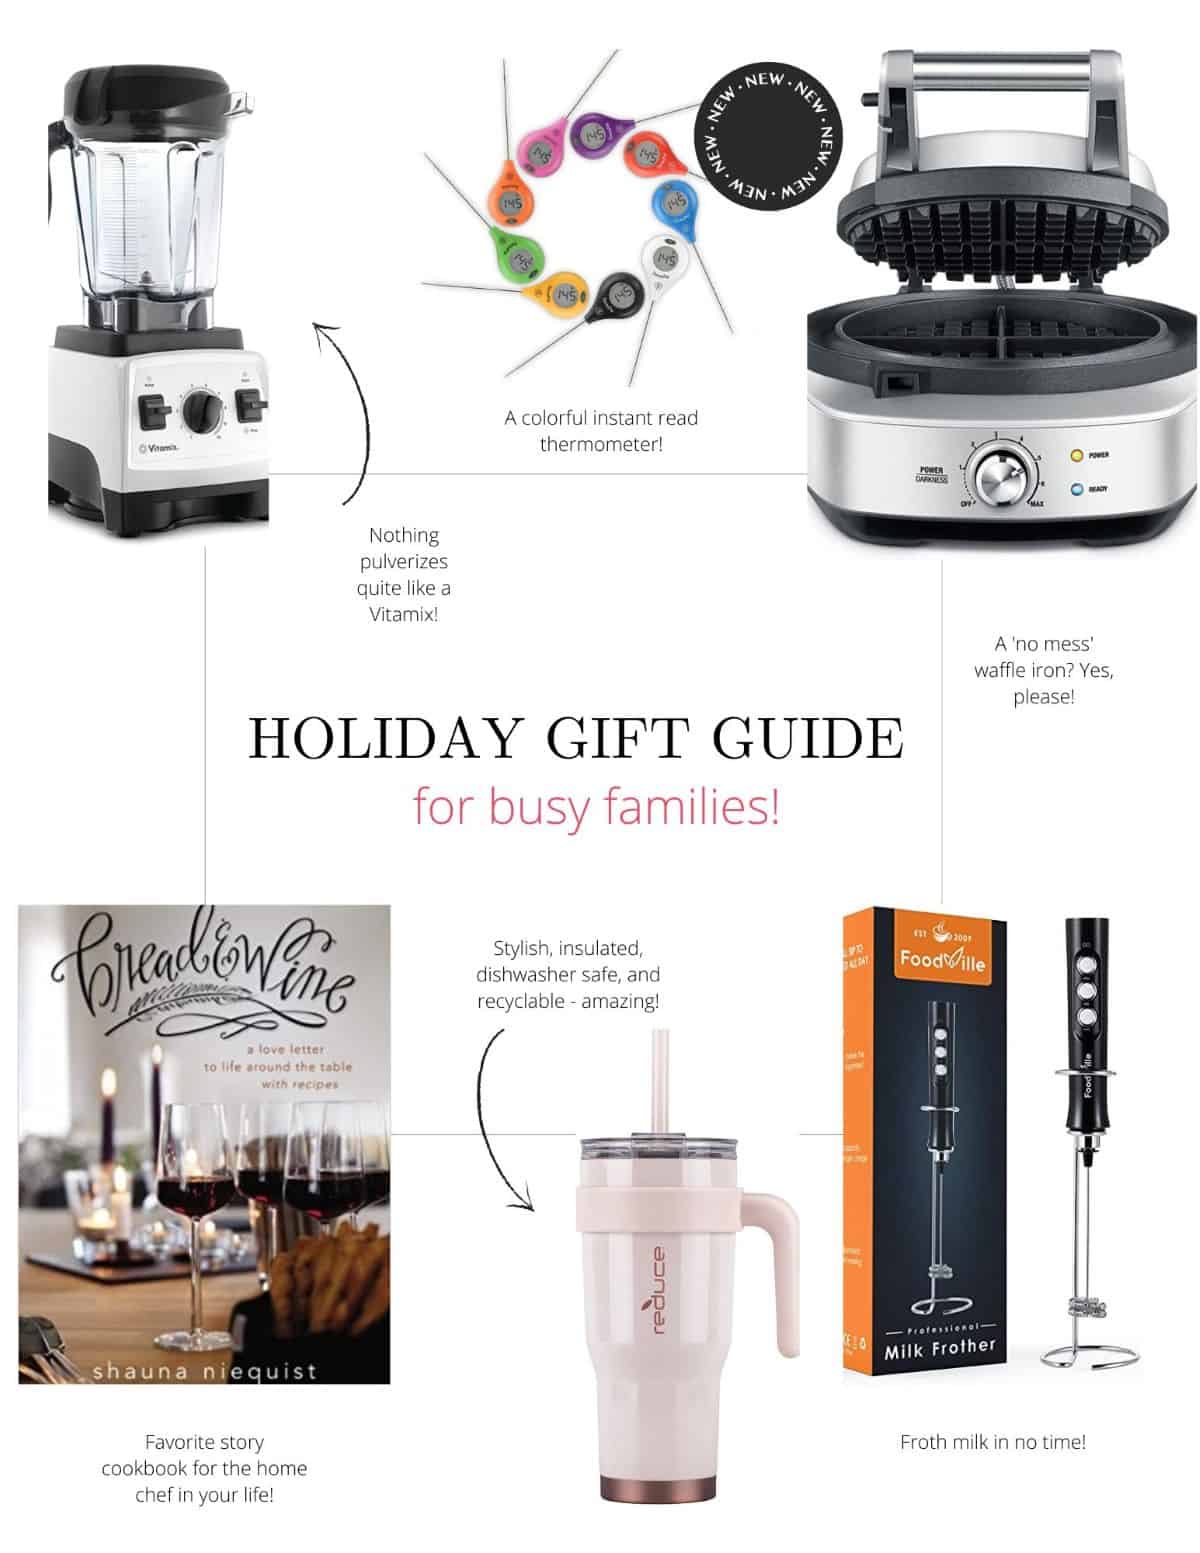 Holiday Gift Guide highlighting six products. From top left to right are a white Vitamix blender, a circle of ThermoPop instant read digital thermometers, and a waffle iron. On the bottom from left to right is a 'Bread and Wine' story cookbook, a light pink Reduce insulated tumbler with a matching straw, and a rechargable milk frother. 